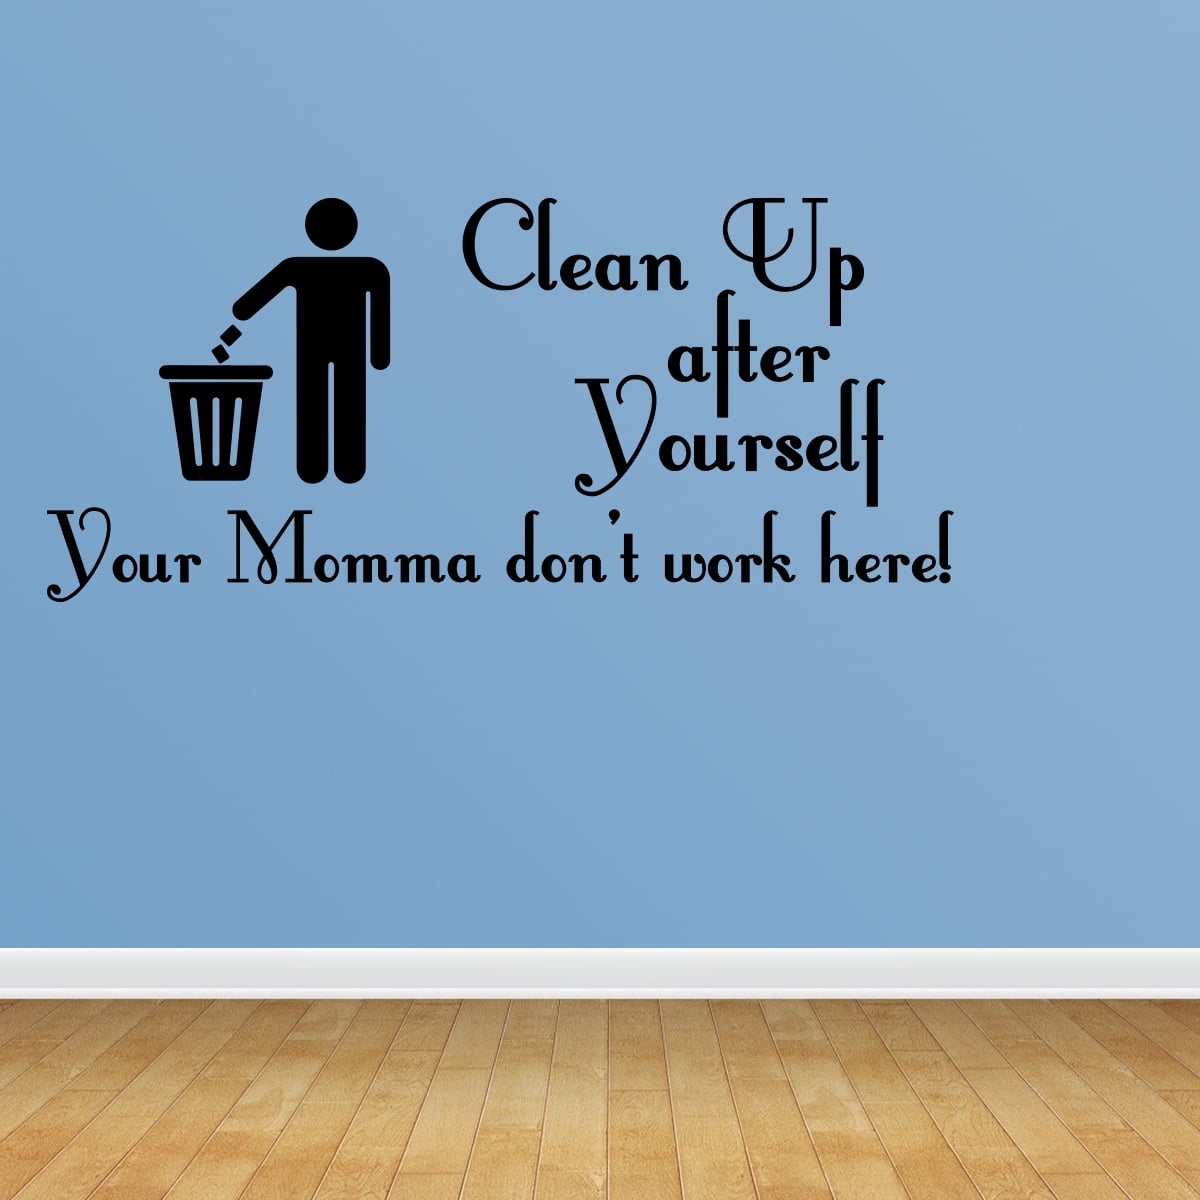 wall-decal-quote-clean-up-after-yourself-fun-quote-sticker-home-decor-r60-walmart